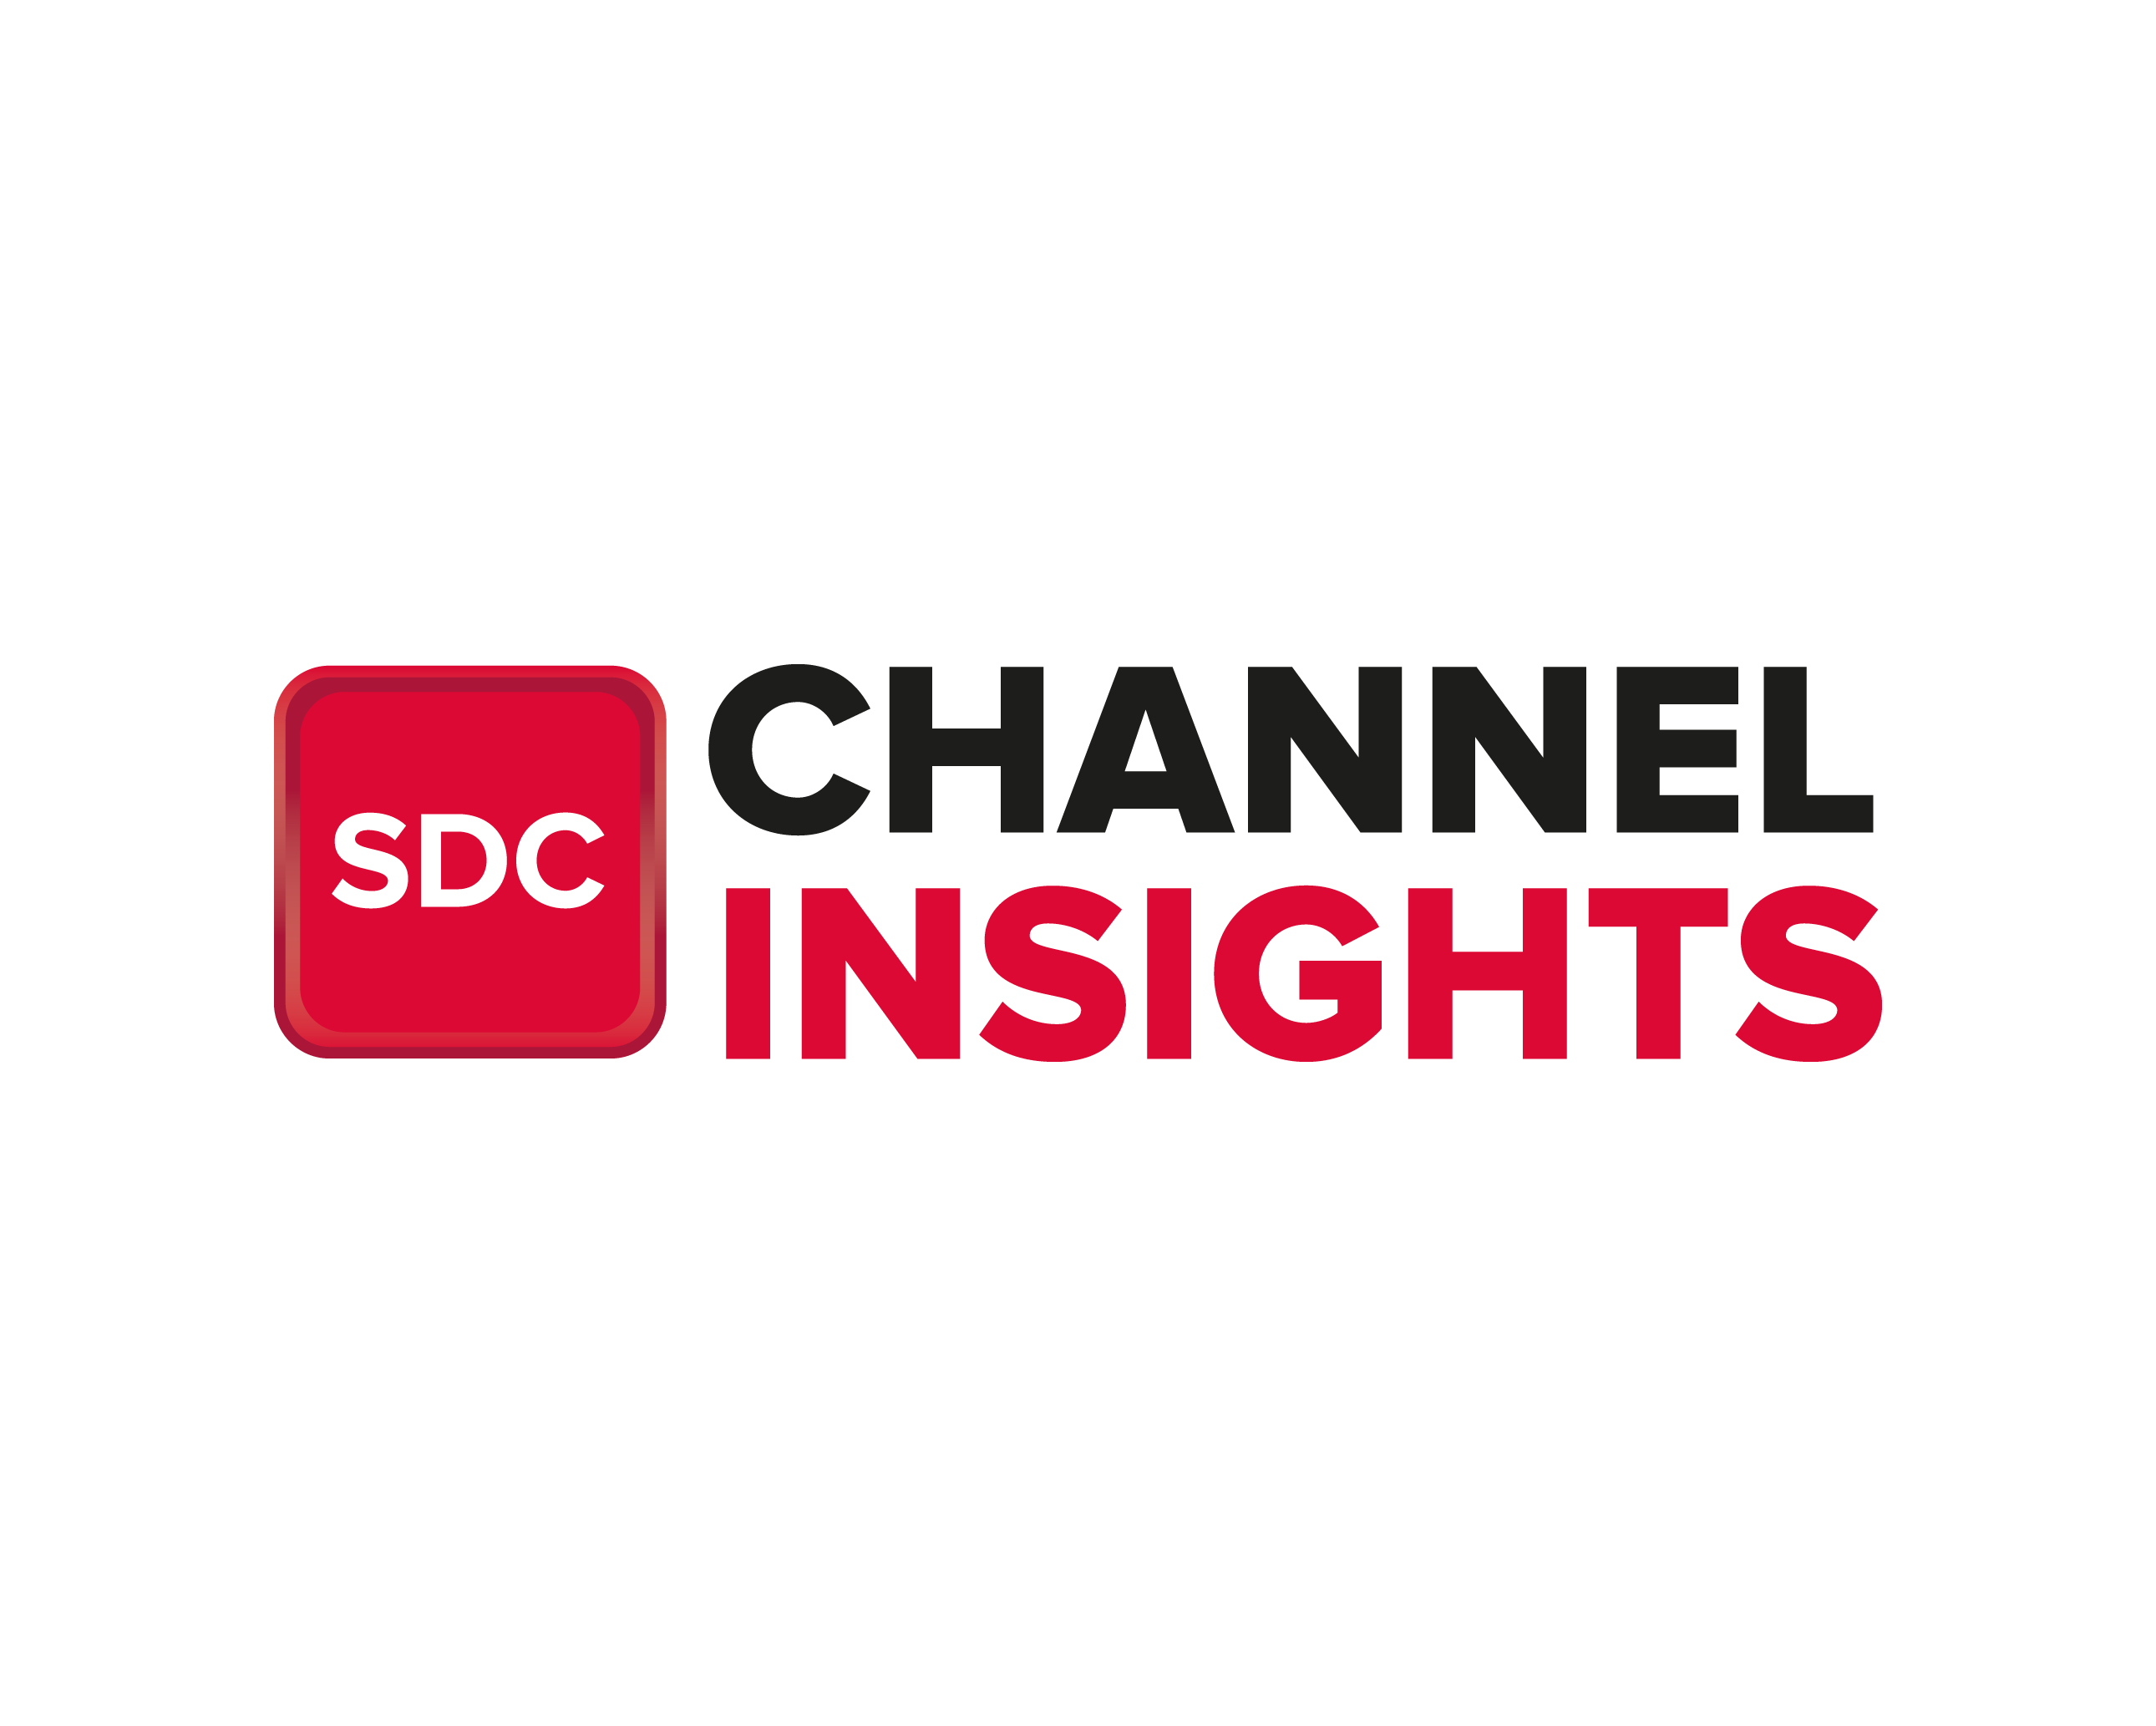 SDC Channel Insights